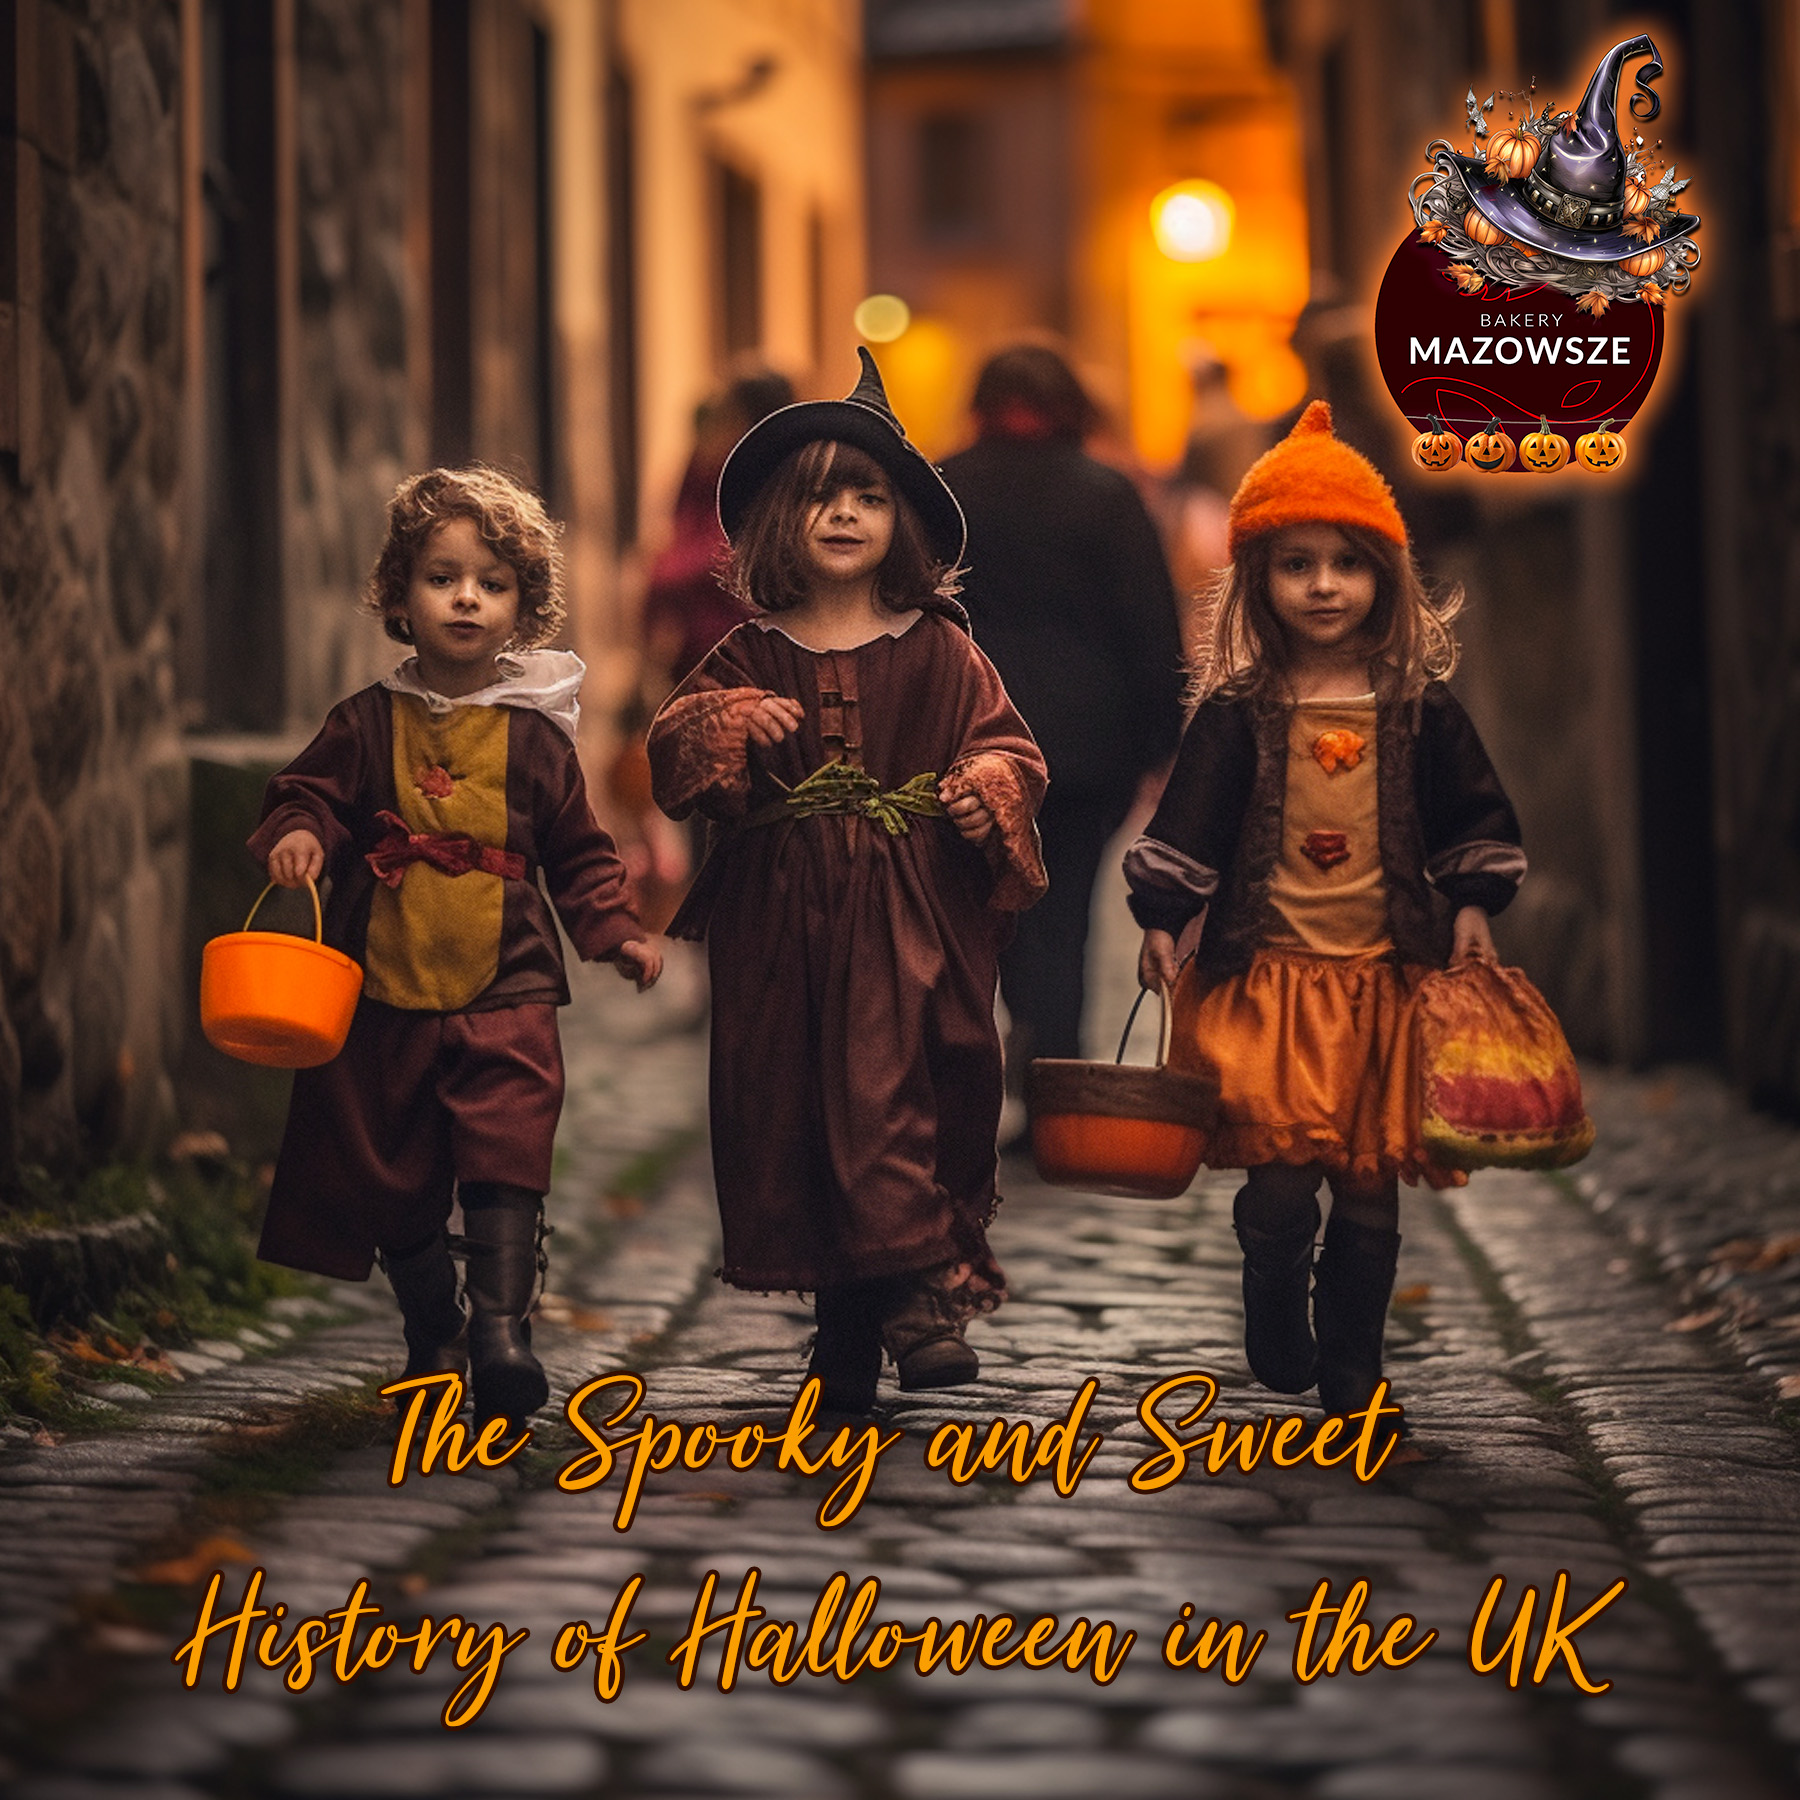 The Spooky and Sweet History of Halloween in the UK